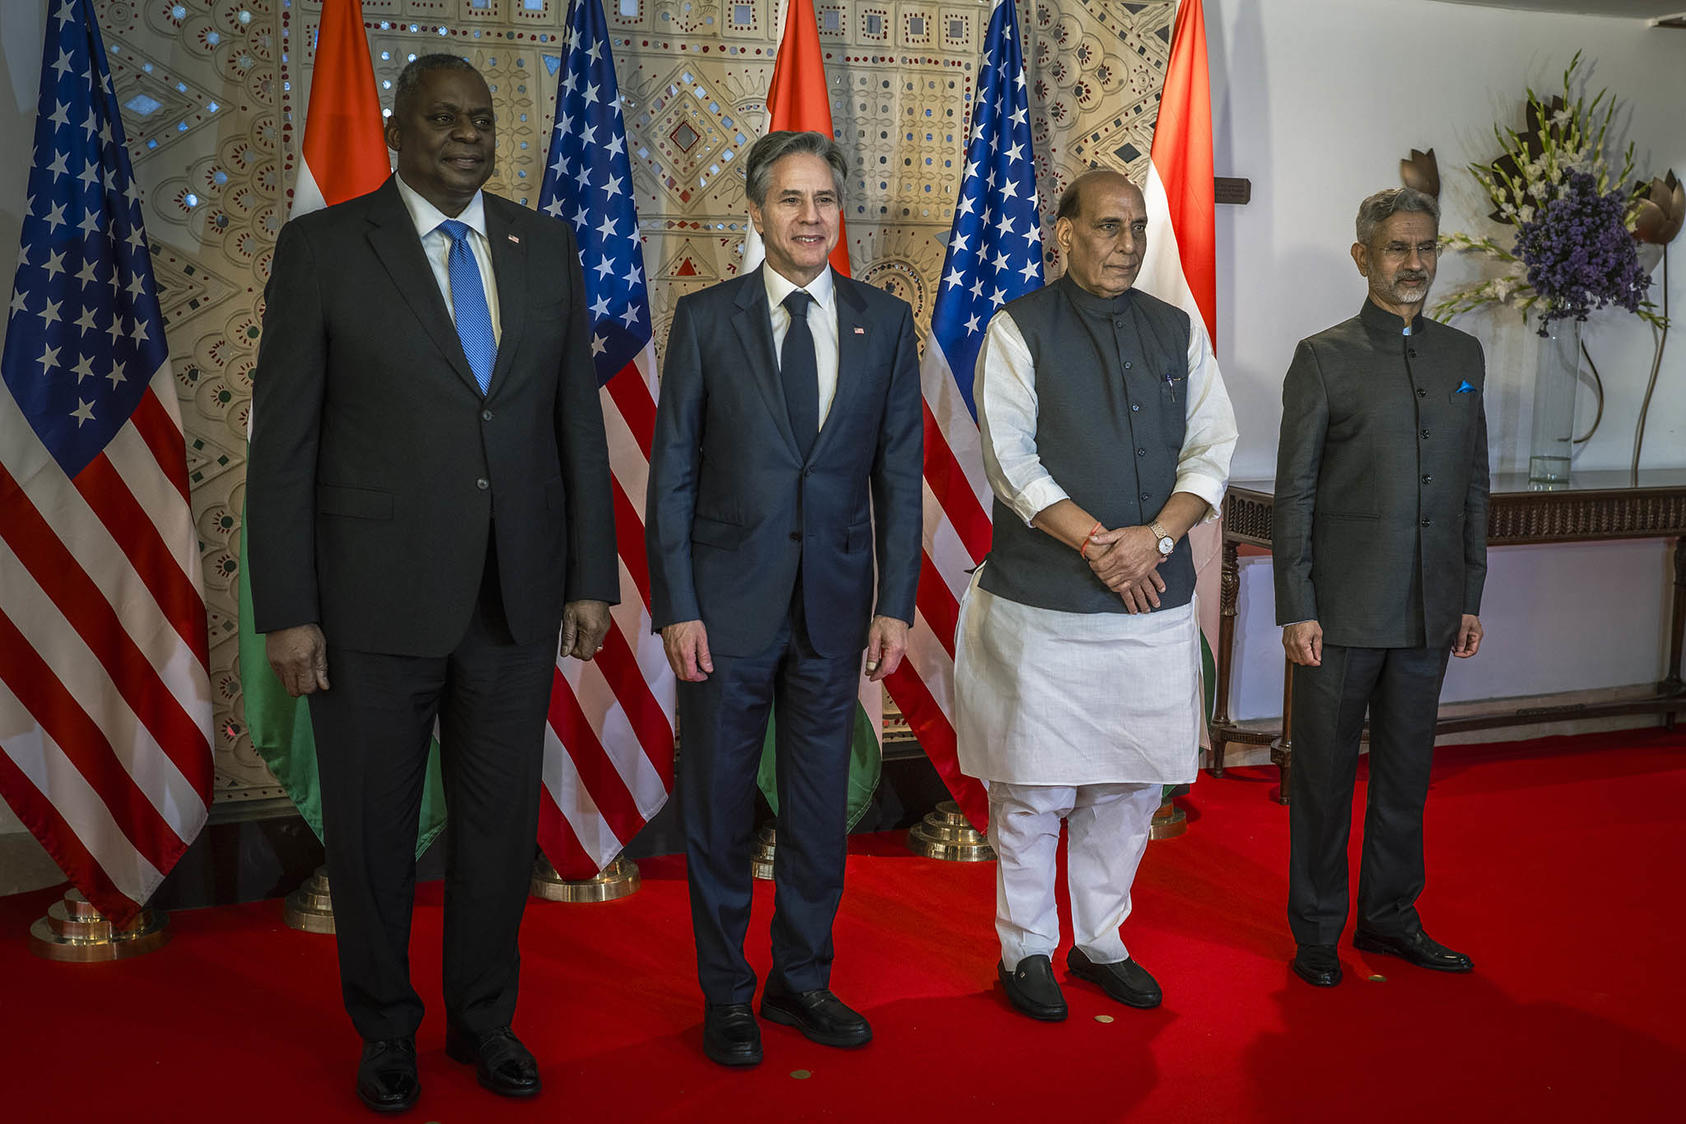 Secretary of Defense Lloyd Austin and Secretary of State Antony Blinken meet with their Indian counterparts in New Delhi, India. November 10, 2023. (Chad J. McNeeley/U.S. Department of Defense)